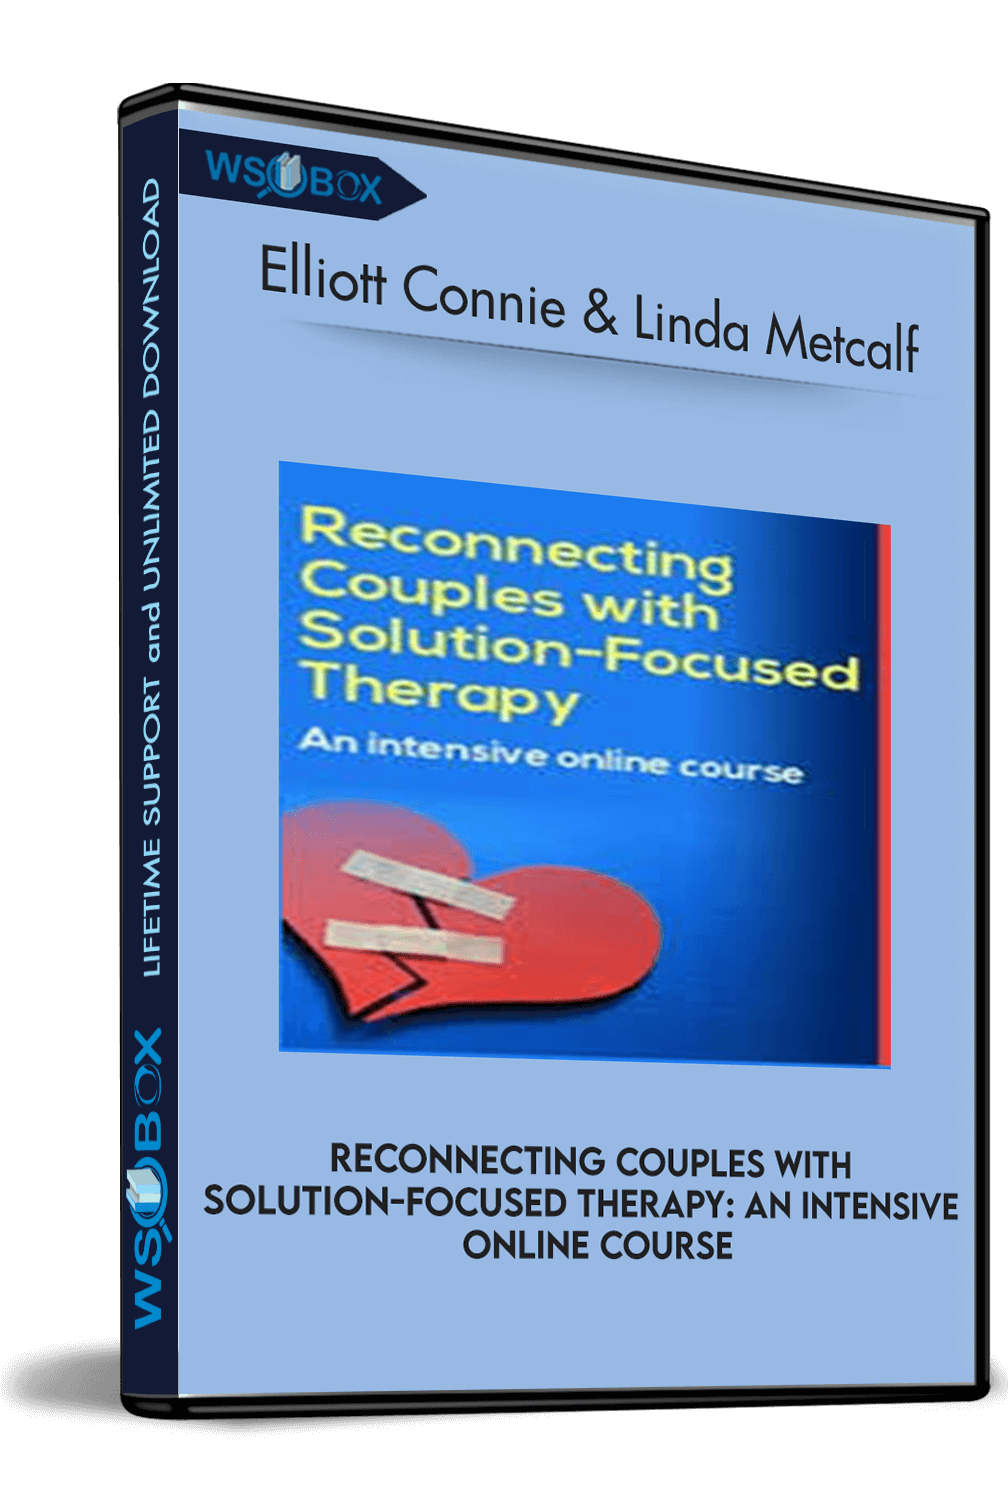 reconnecting-couples-with-solution-focused-therapy-an-intensive-online-course-elliott-connie-linda-metcalf